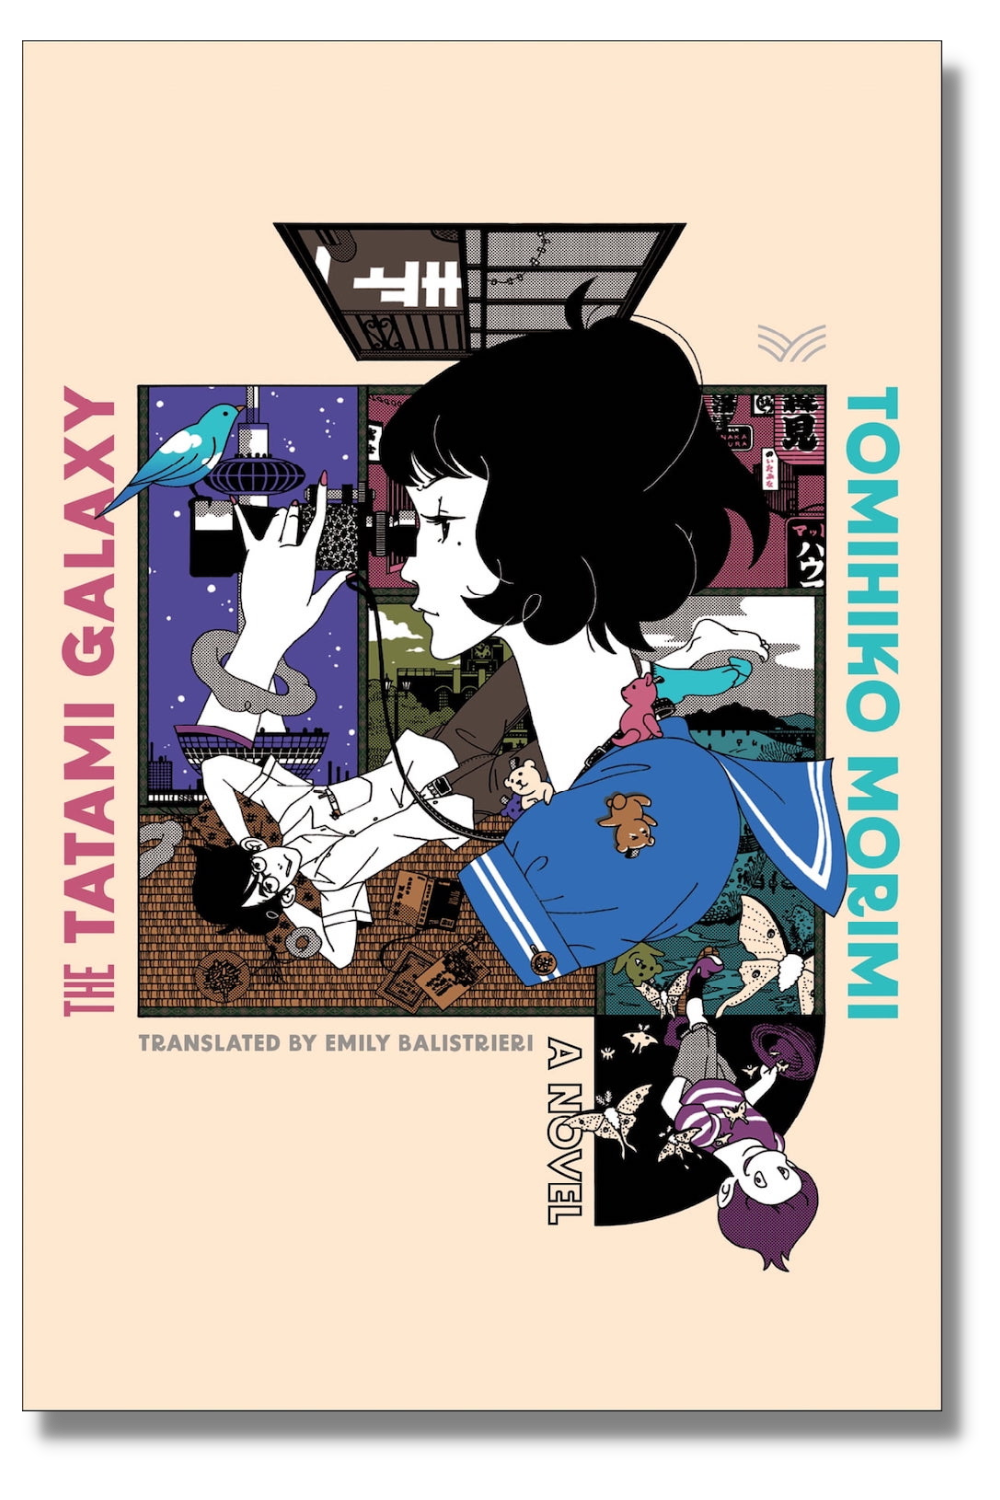 The cover of "The Tatami Galaxy"